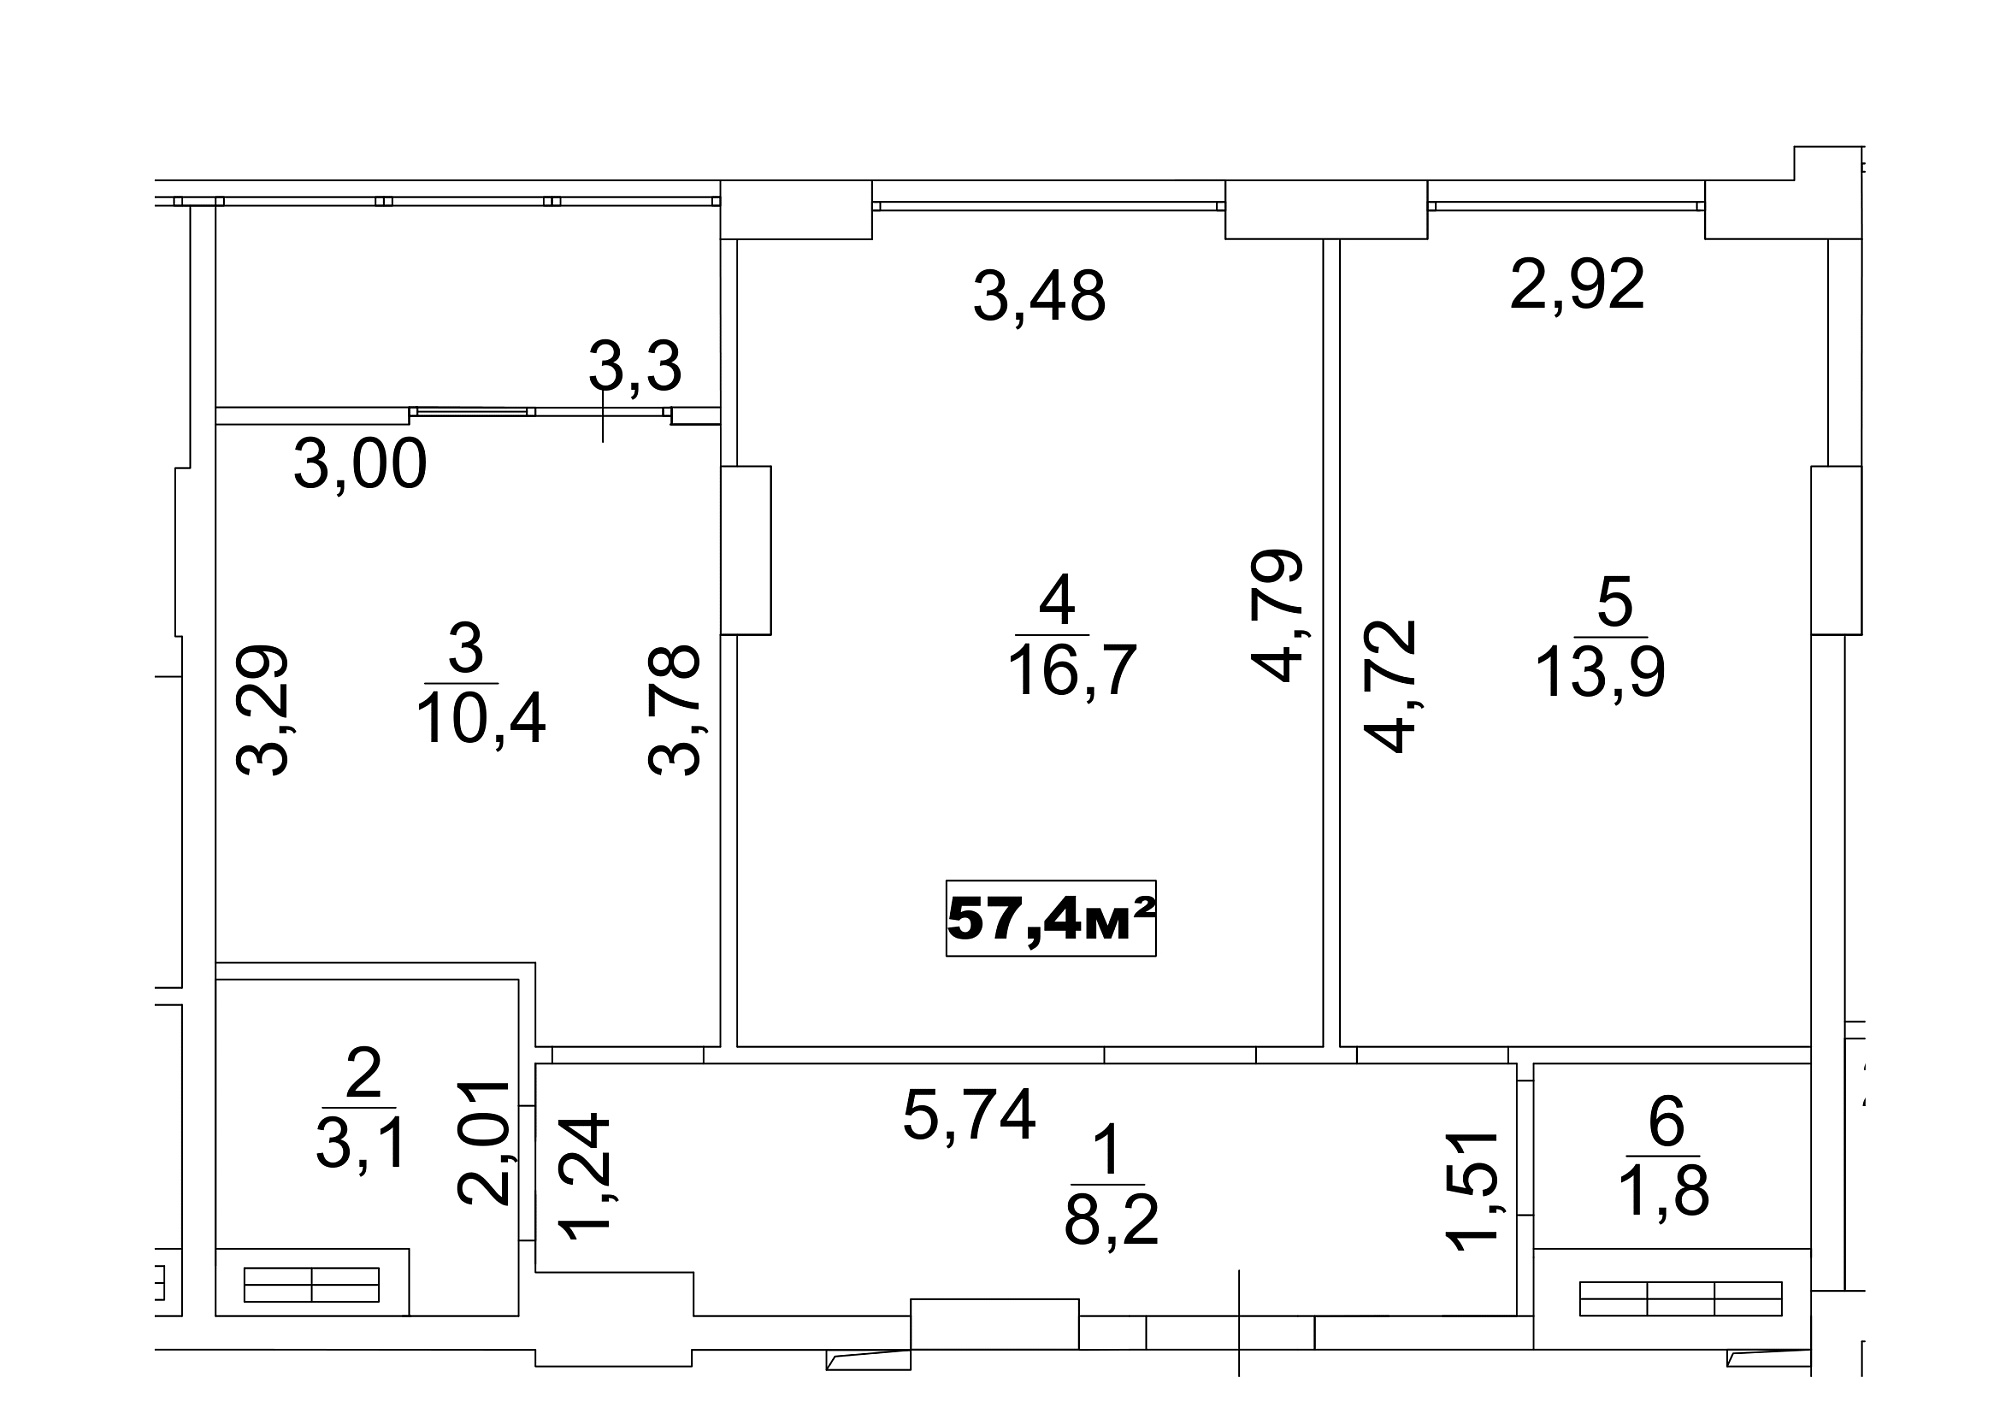 Planning 2-rm flats area 57.4m2, AB-13-07/00055.